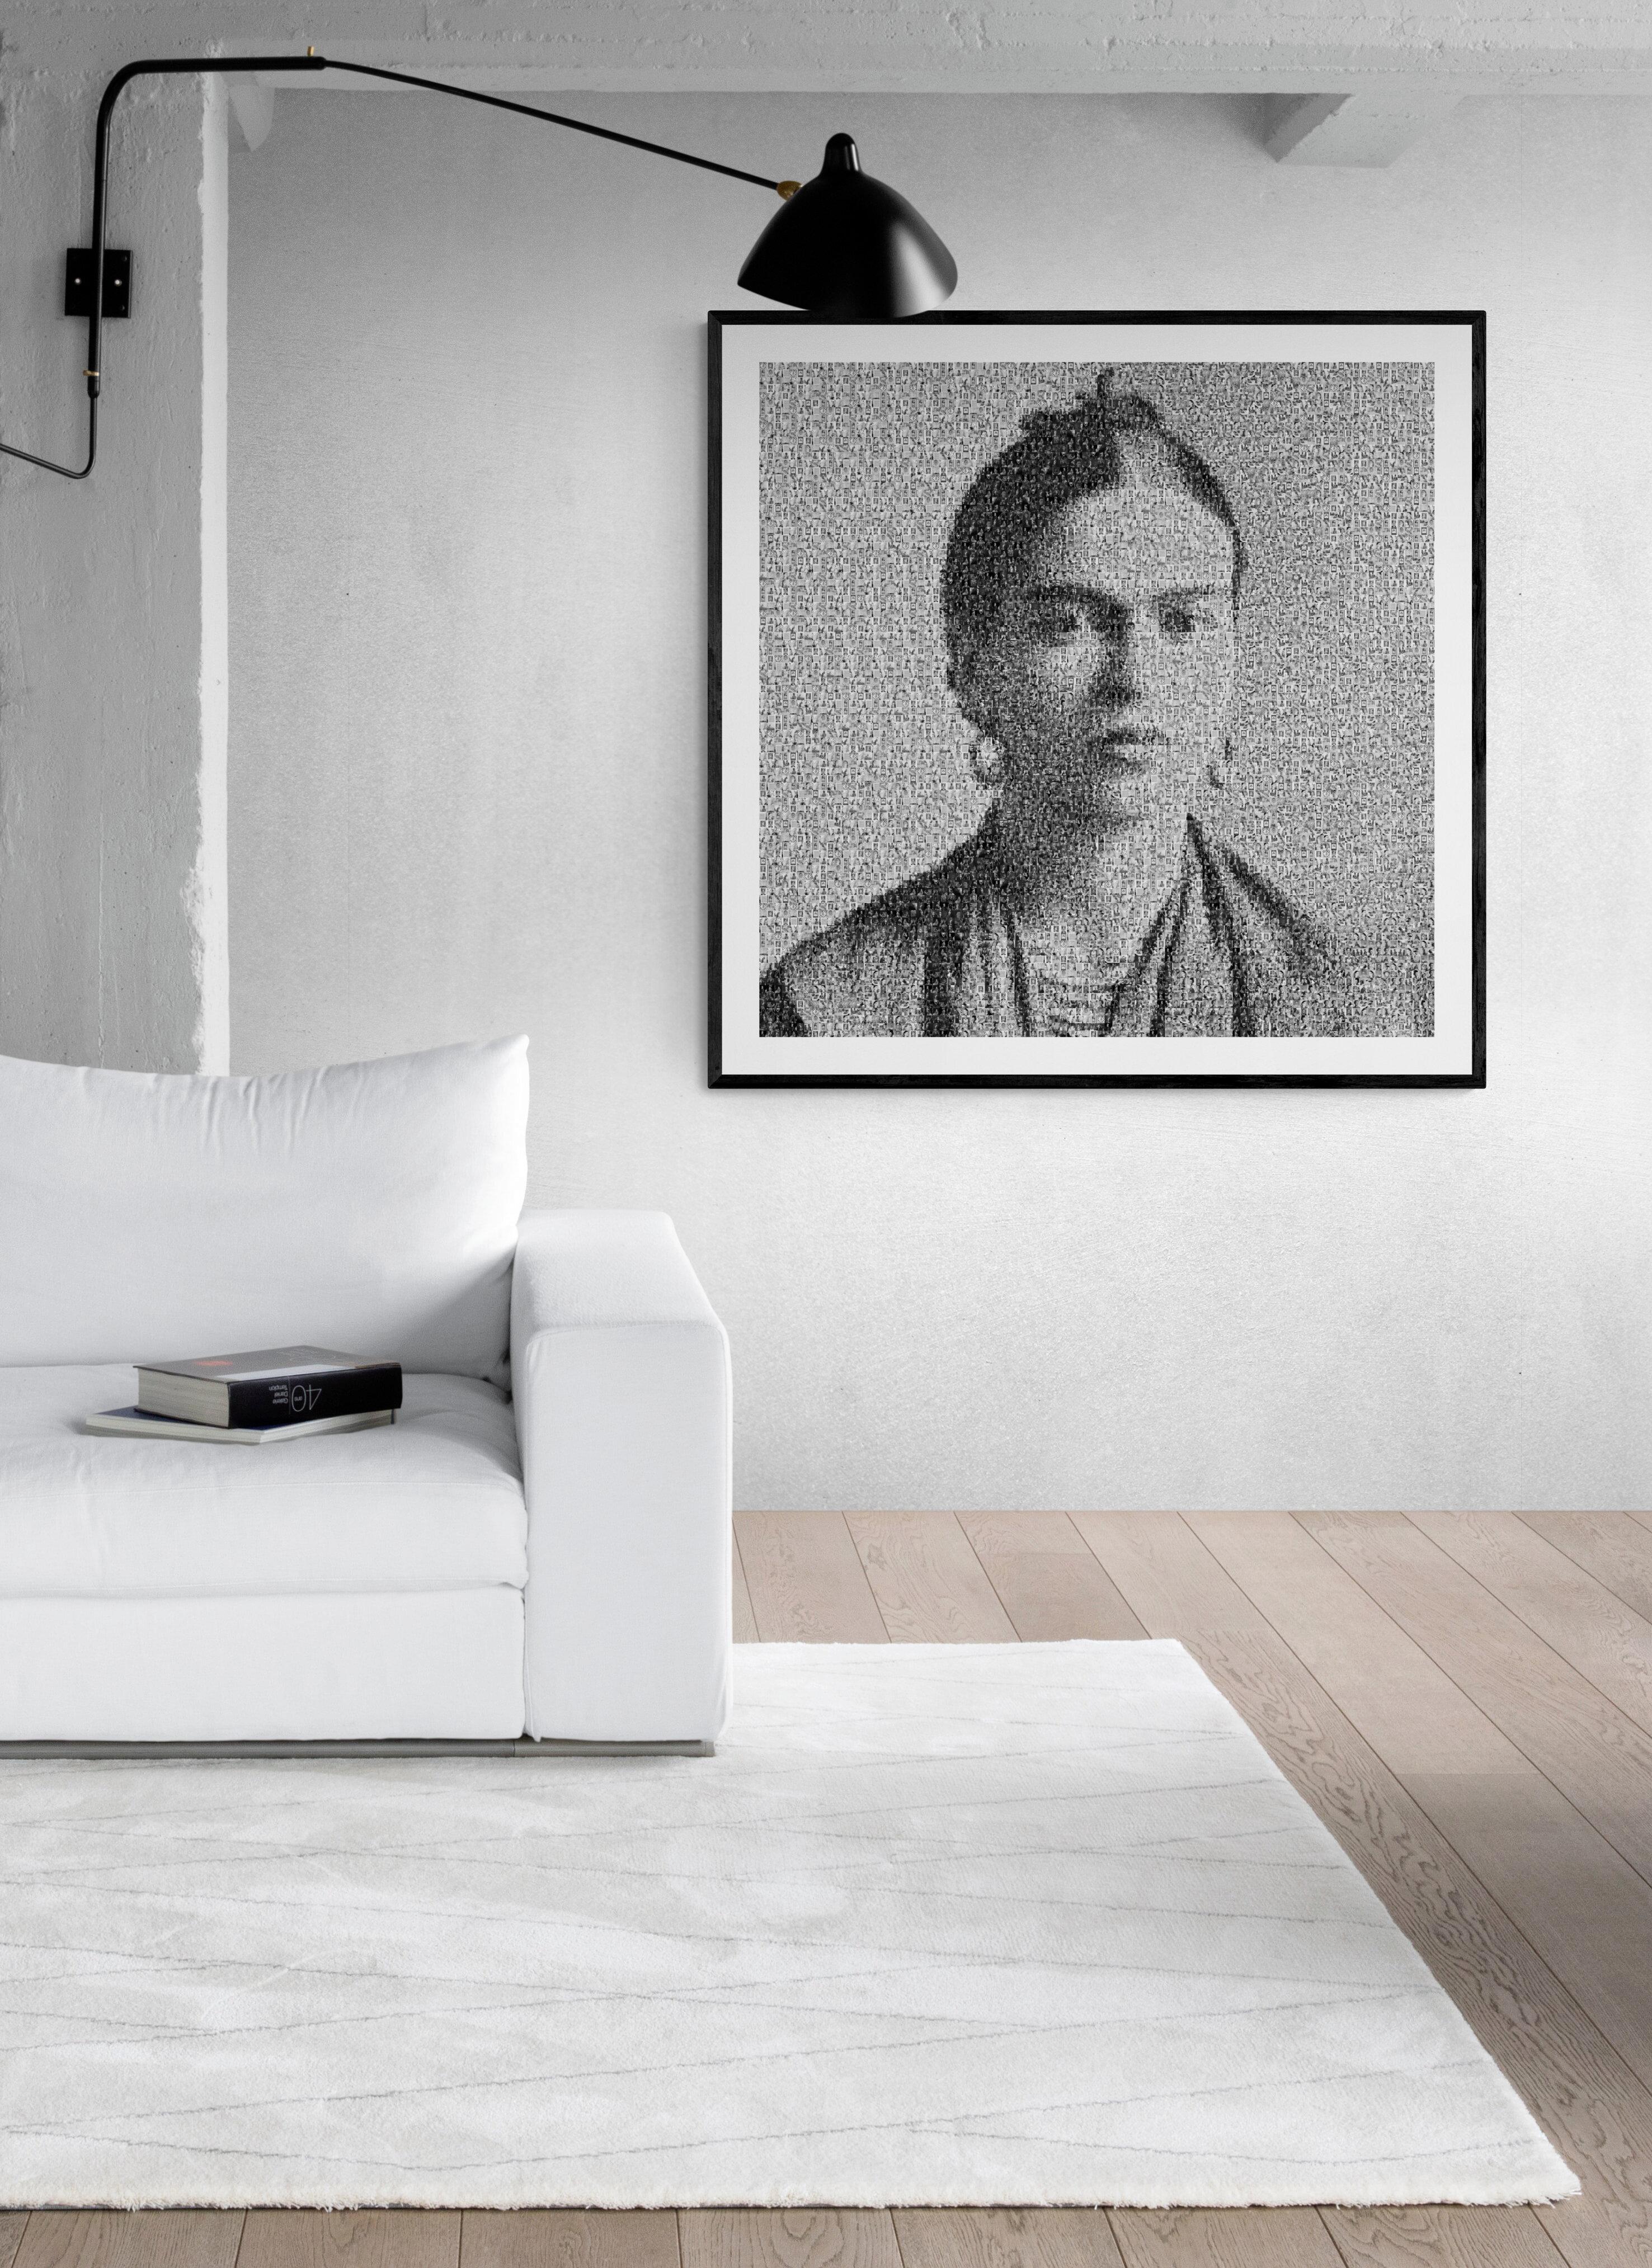 
Frida is a photomosaic artwork by Destro. The first release in a series mosaic works called 